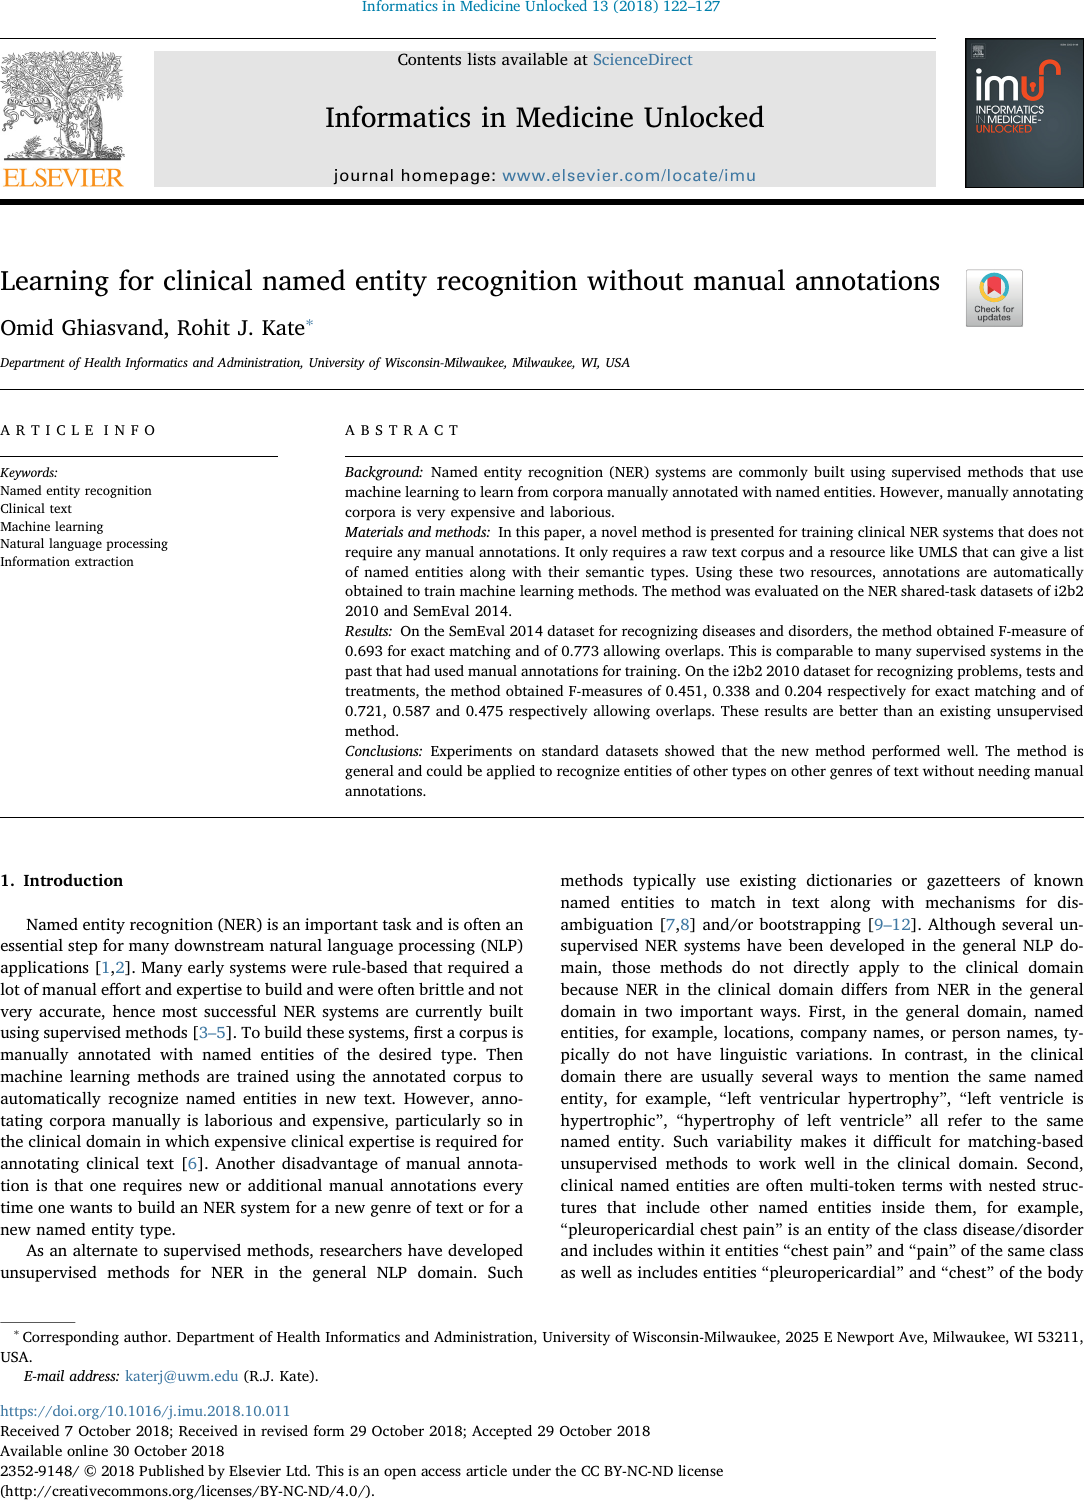 Page 1 of 6 - Learning For Clinical Named Entity Recognition Without Manual Annotations 2018-11-23